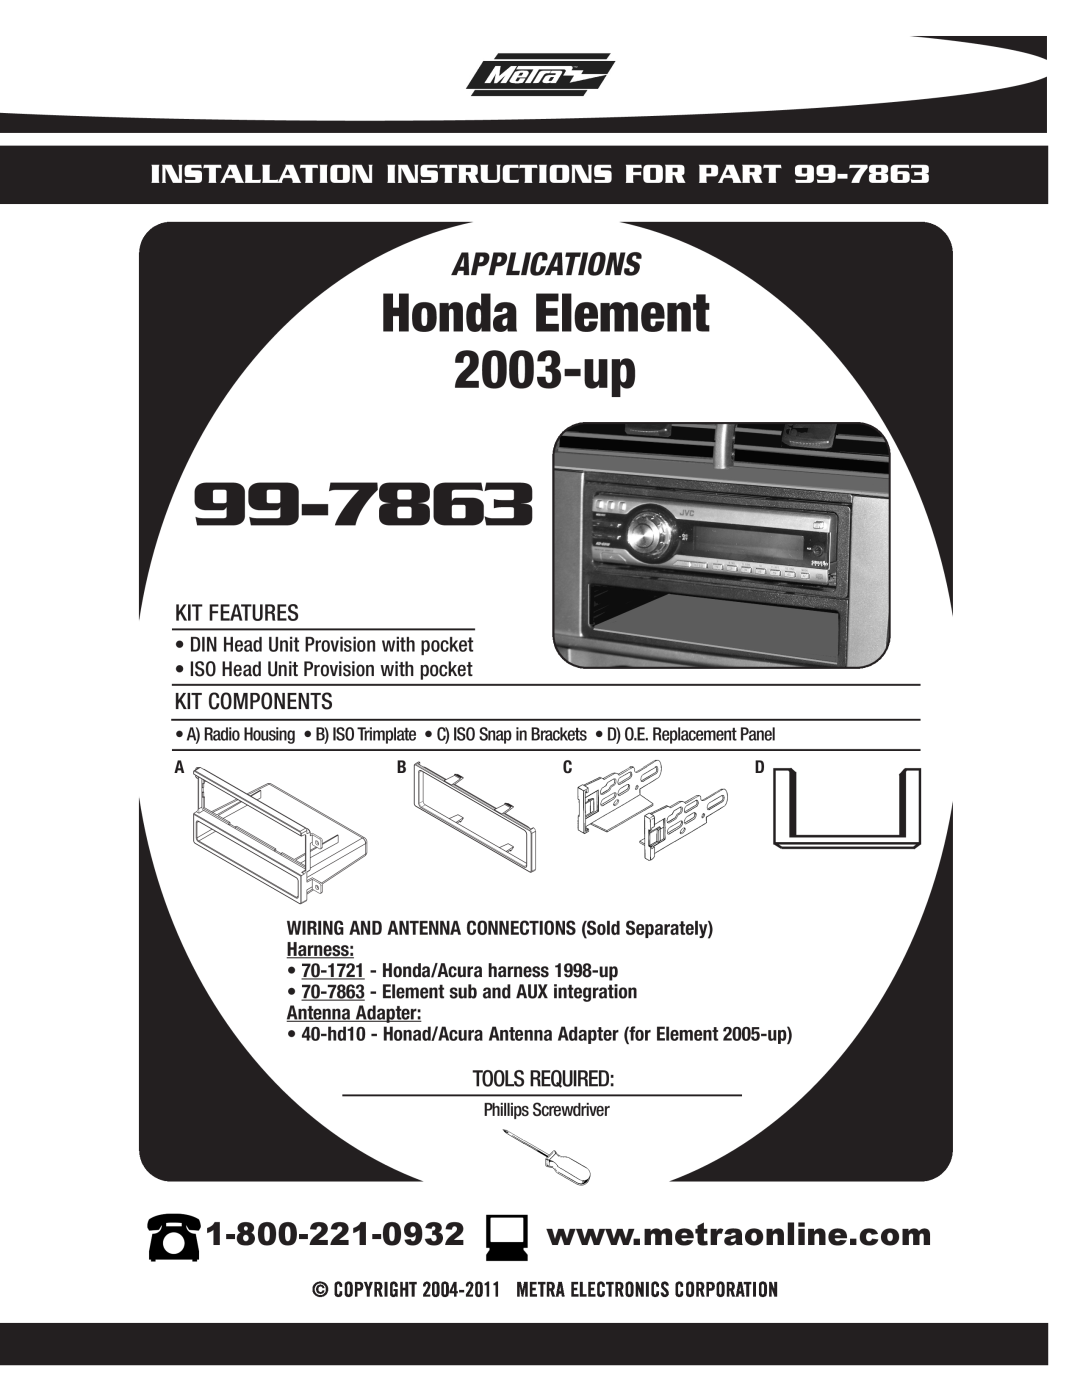 Metra Electronics 99-7863 installation instructions Honda Element, 2003-up, Applications, Kit Features, Kit Components 